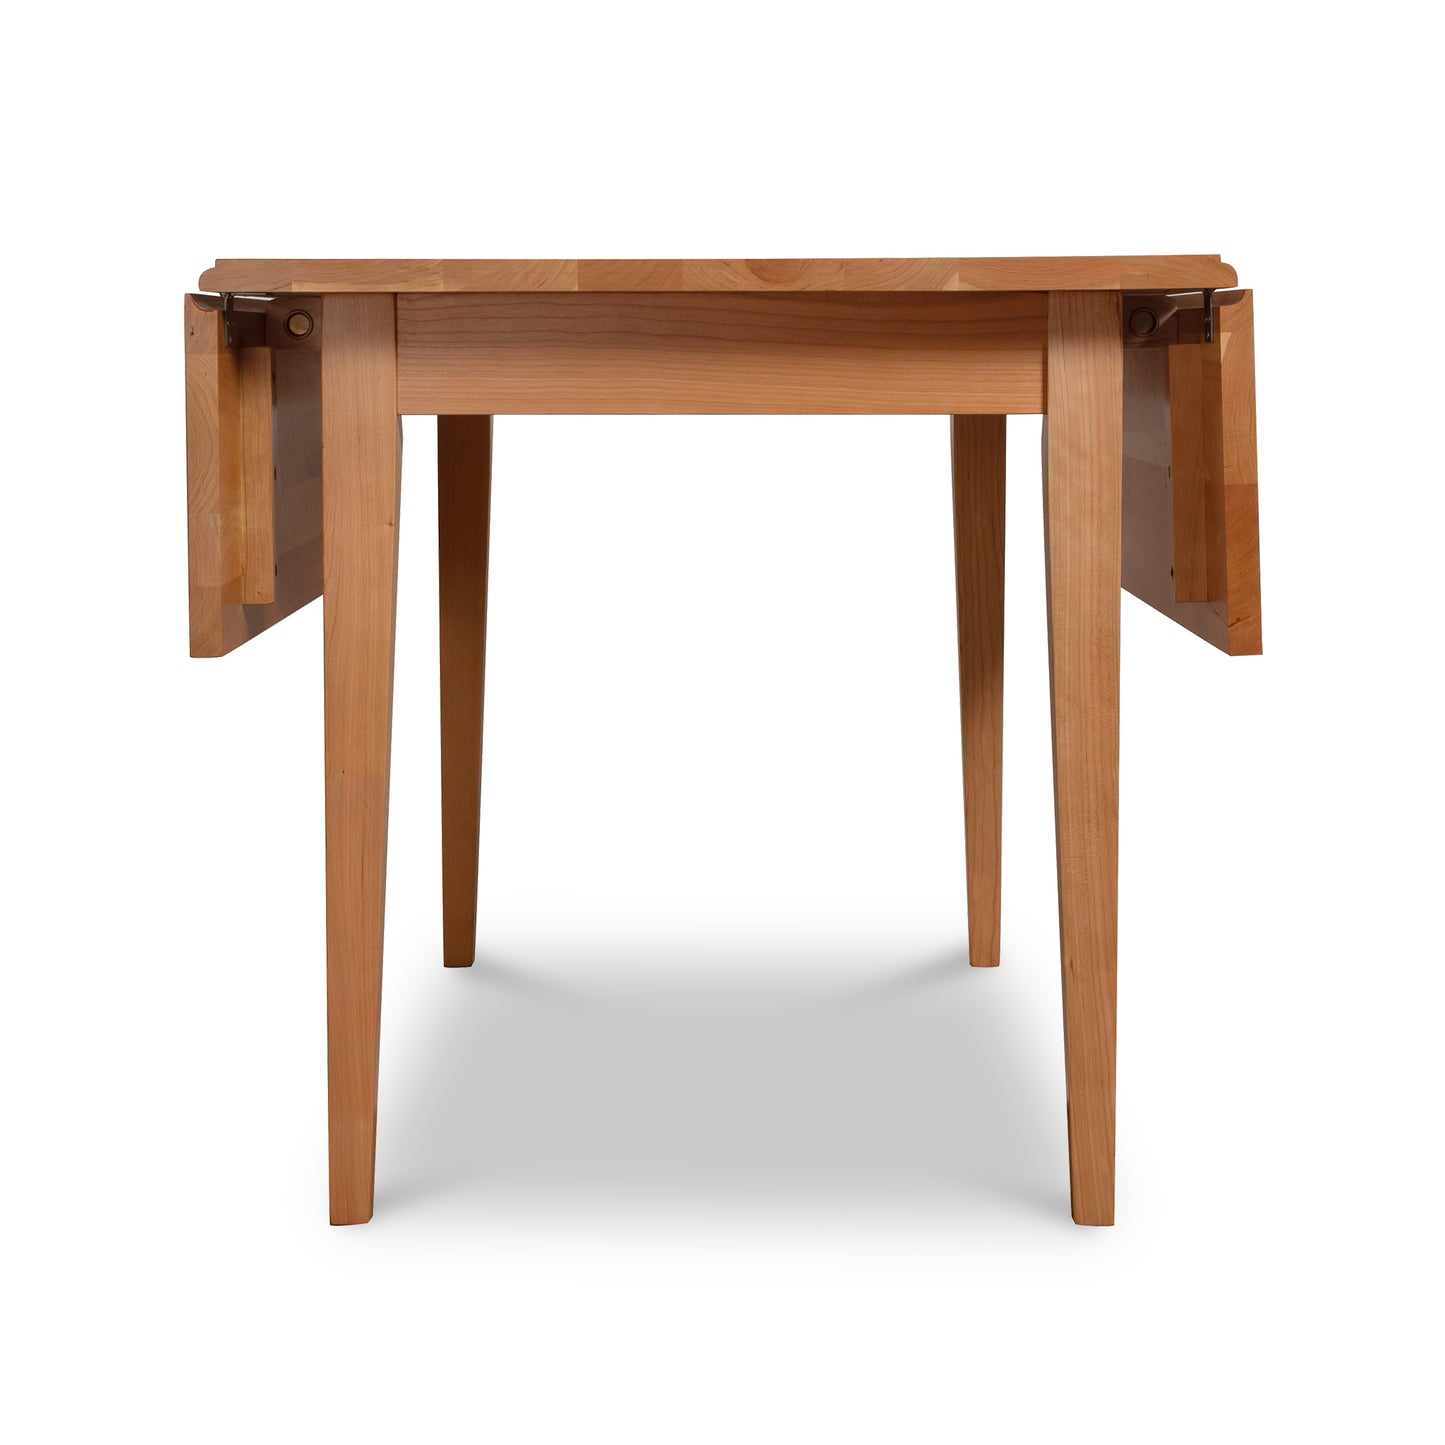 A Lyndon Furniture drop leaf table perfect for kitchen or dining room settings and ideal for family gatherings.